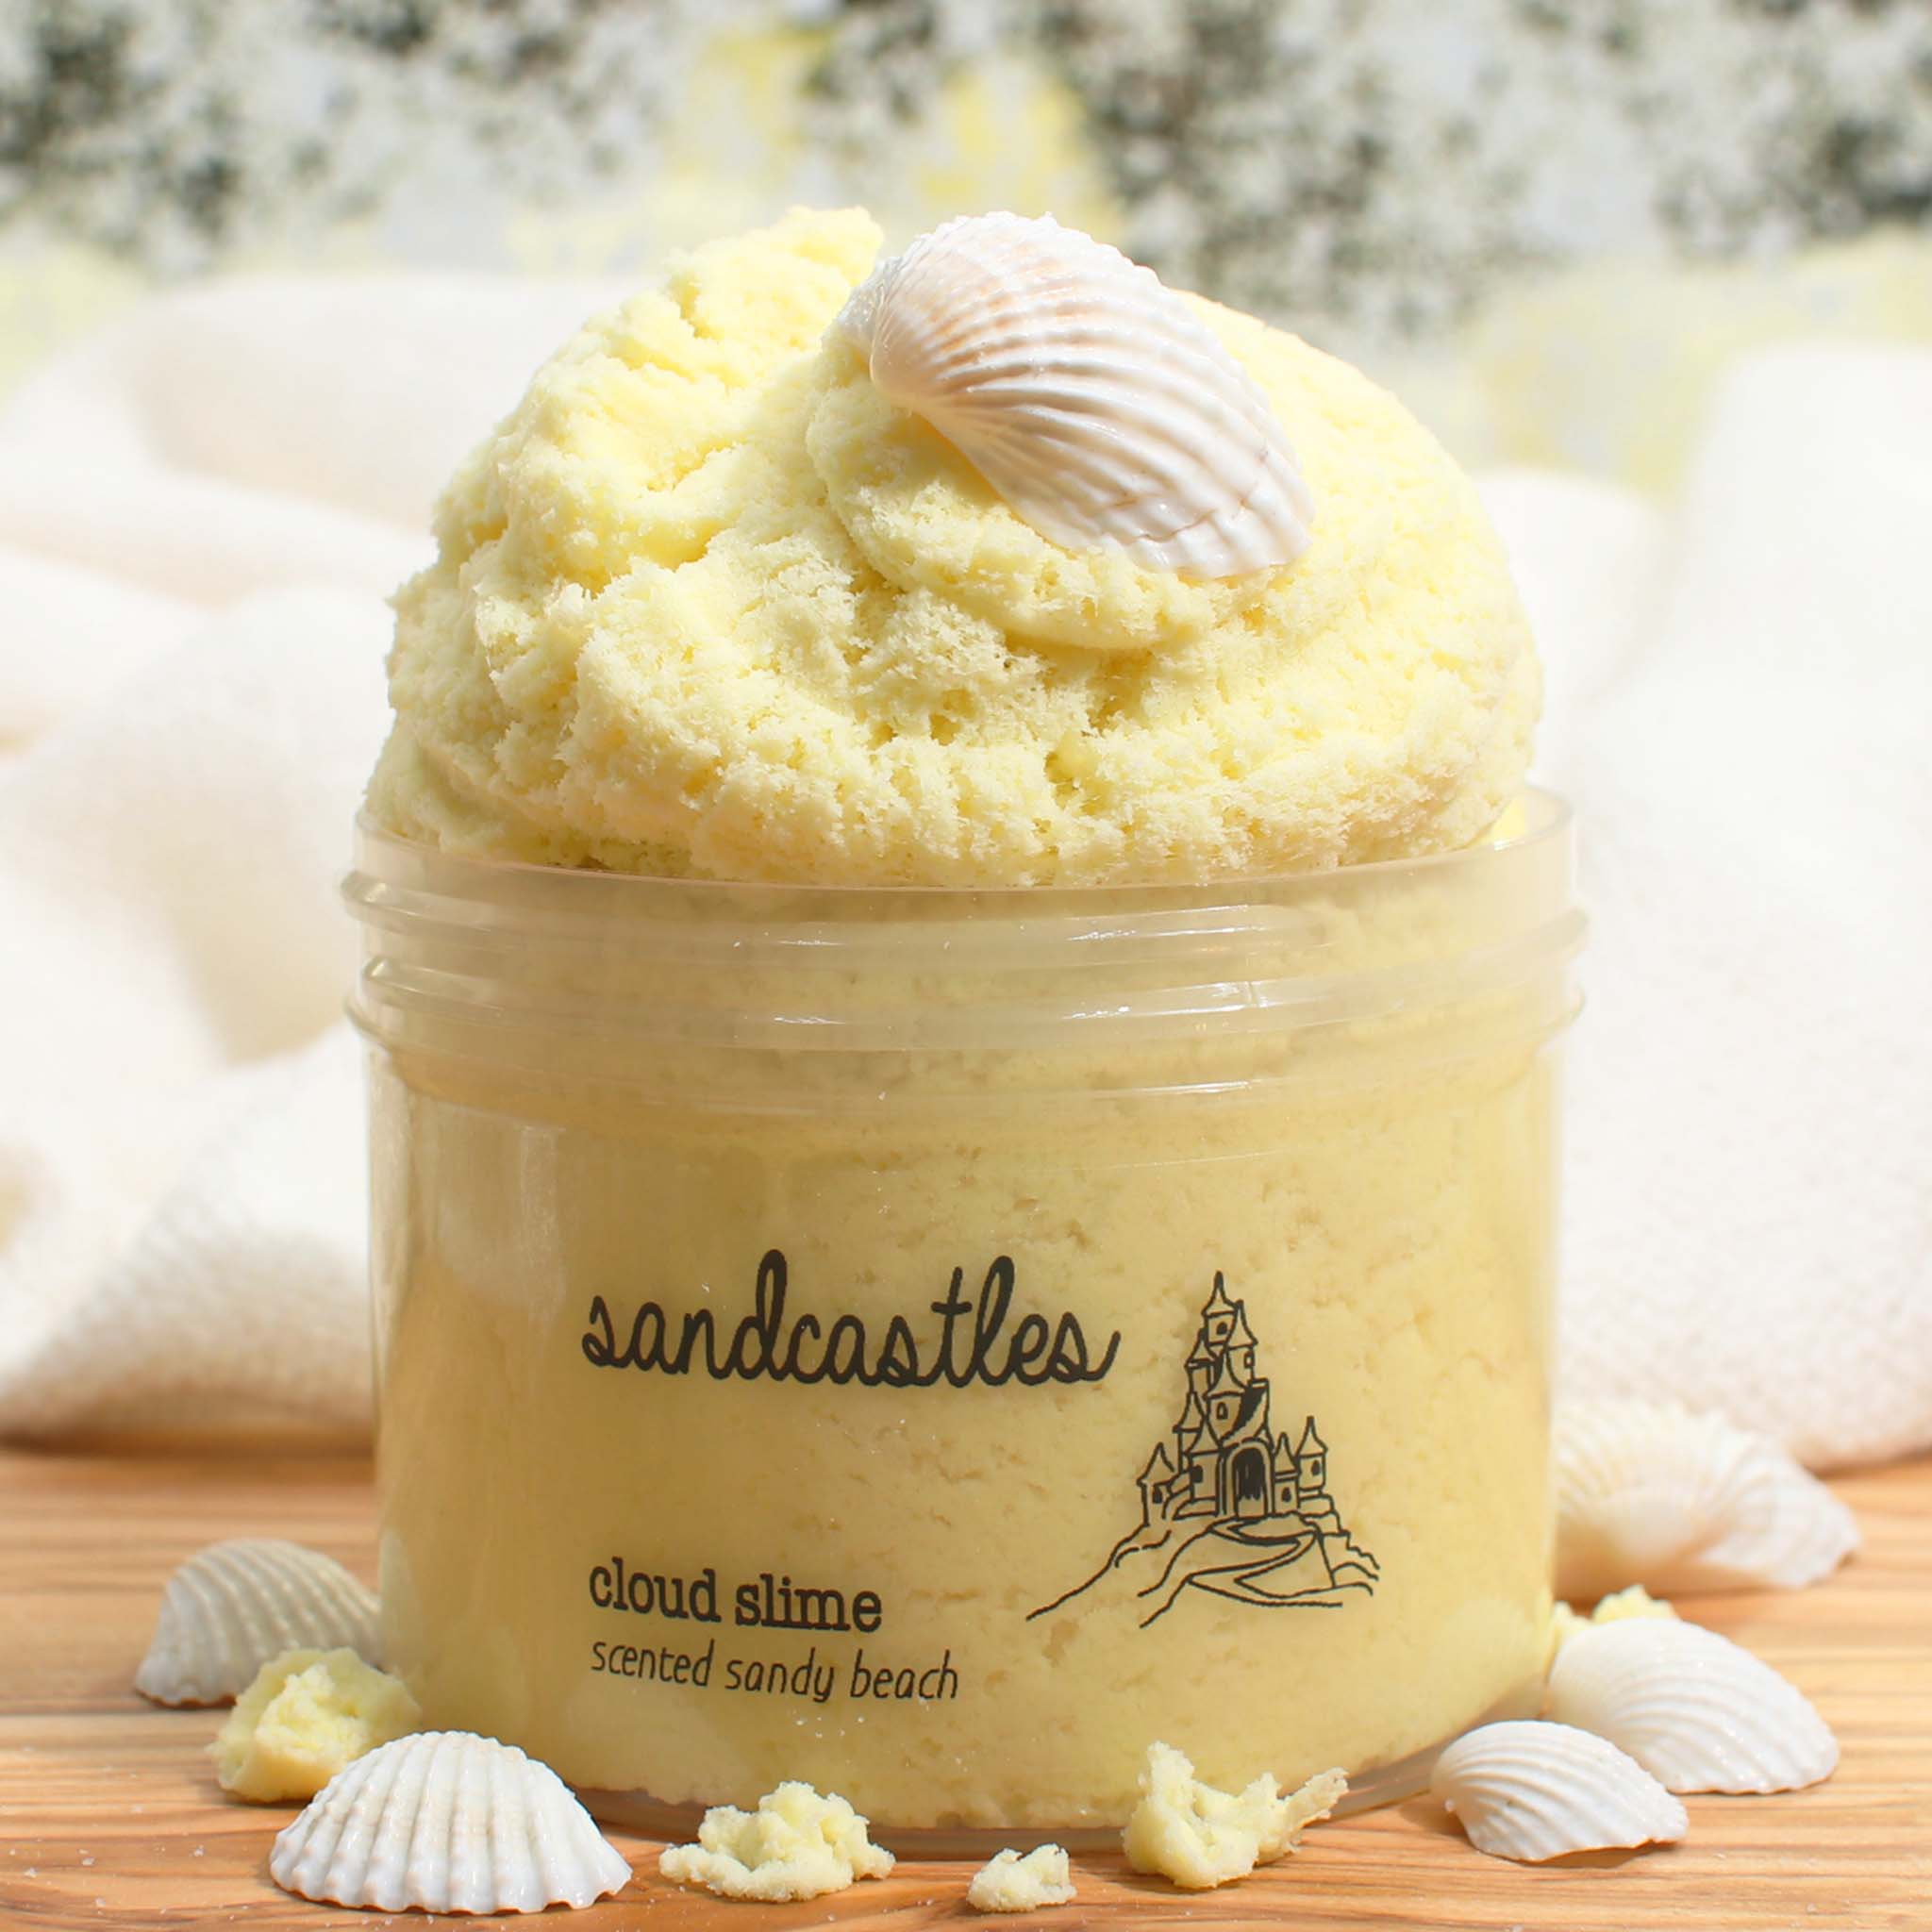 Sandcastles Yellow Fluffy Cloud Slime Fantasies 9oz Front View